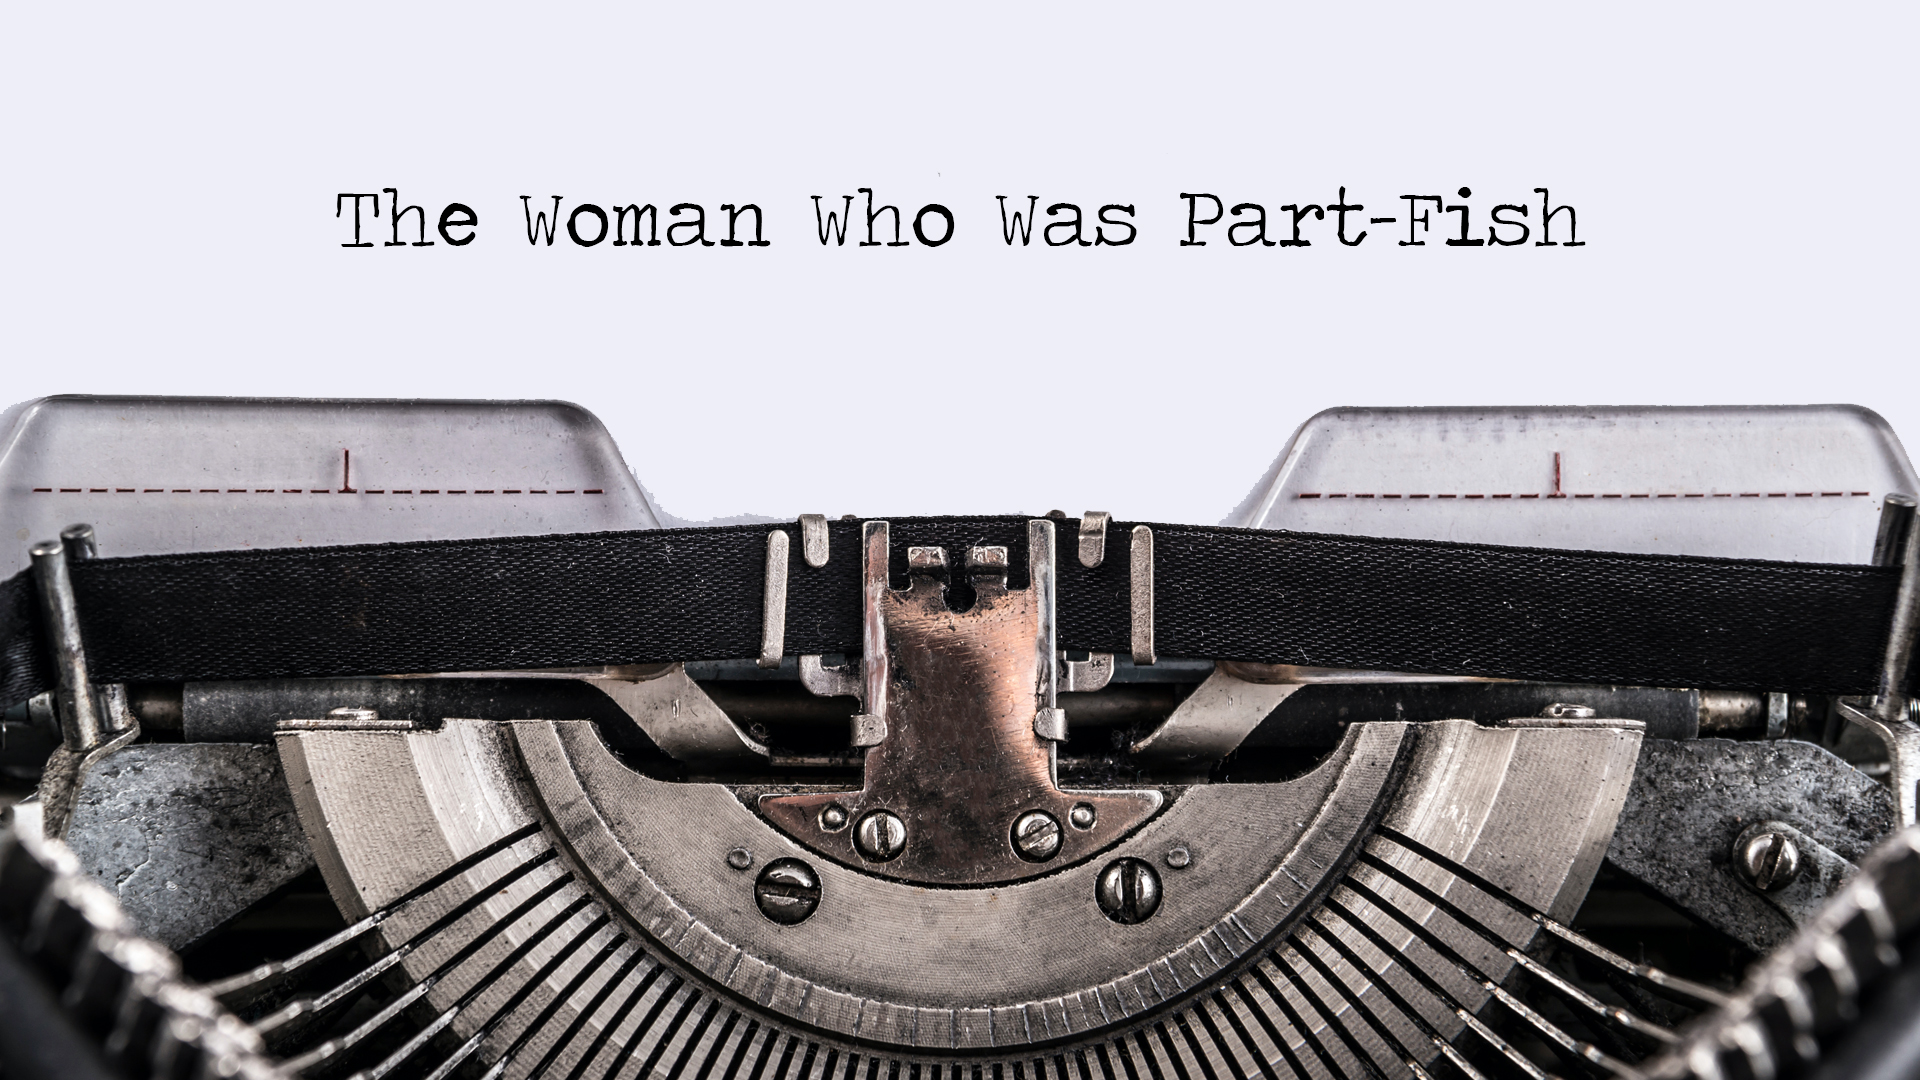 A typewriter and paper with the words "The woman who was part-fish"